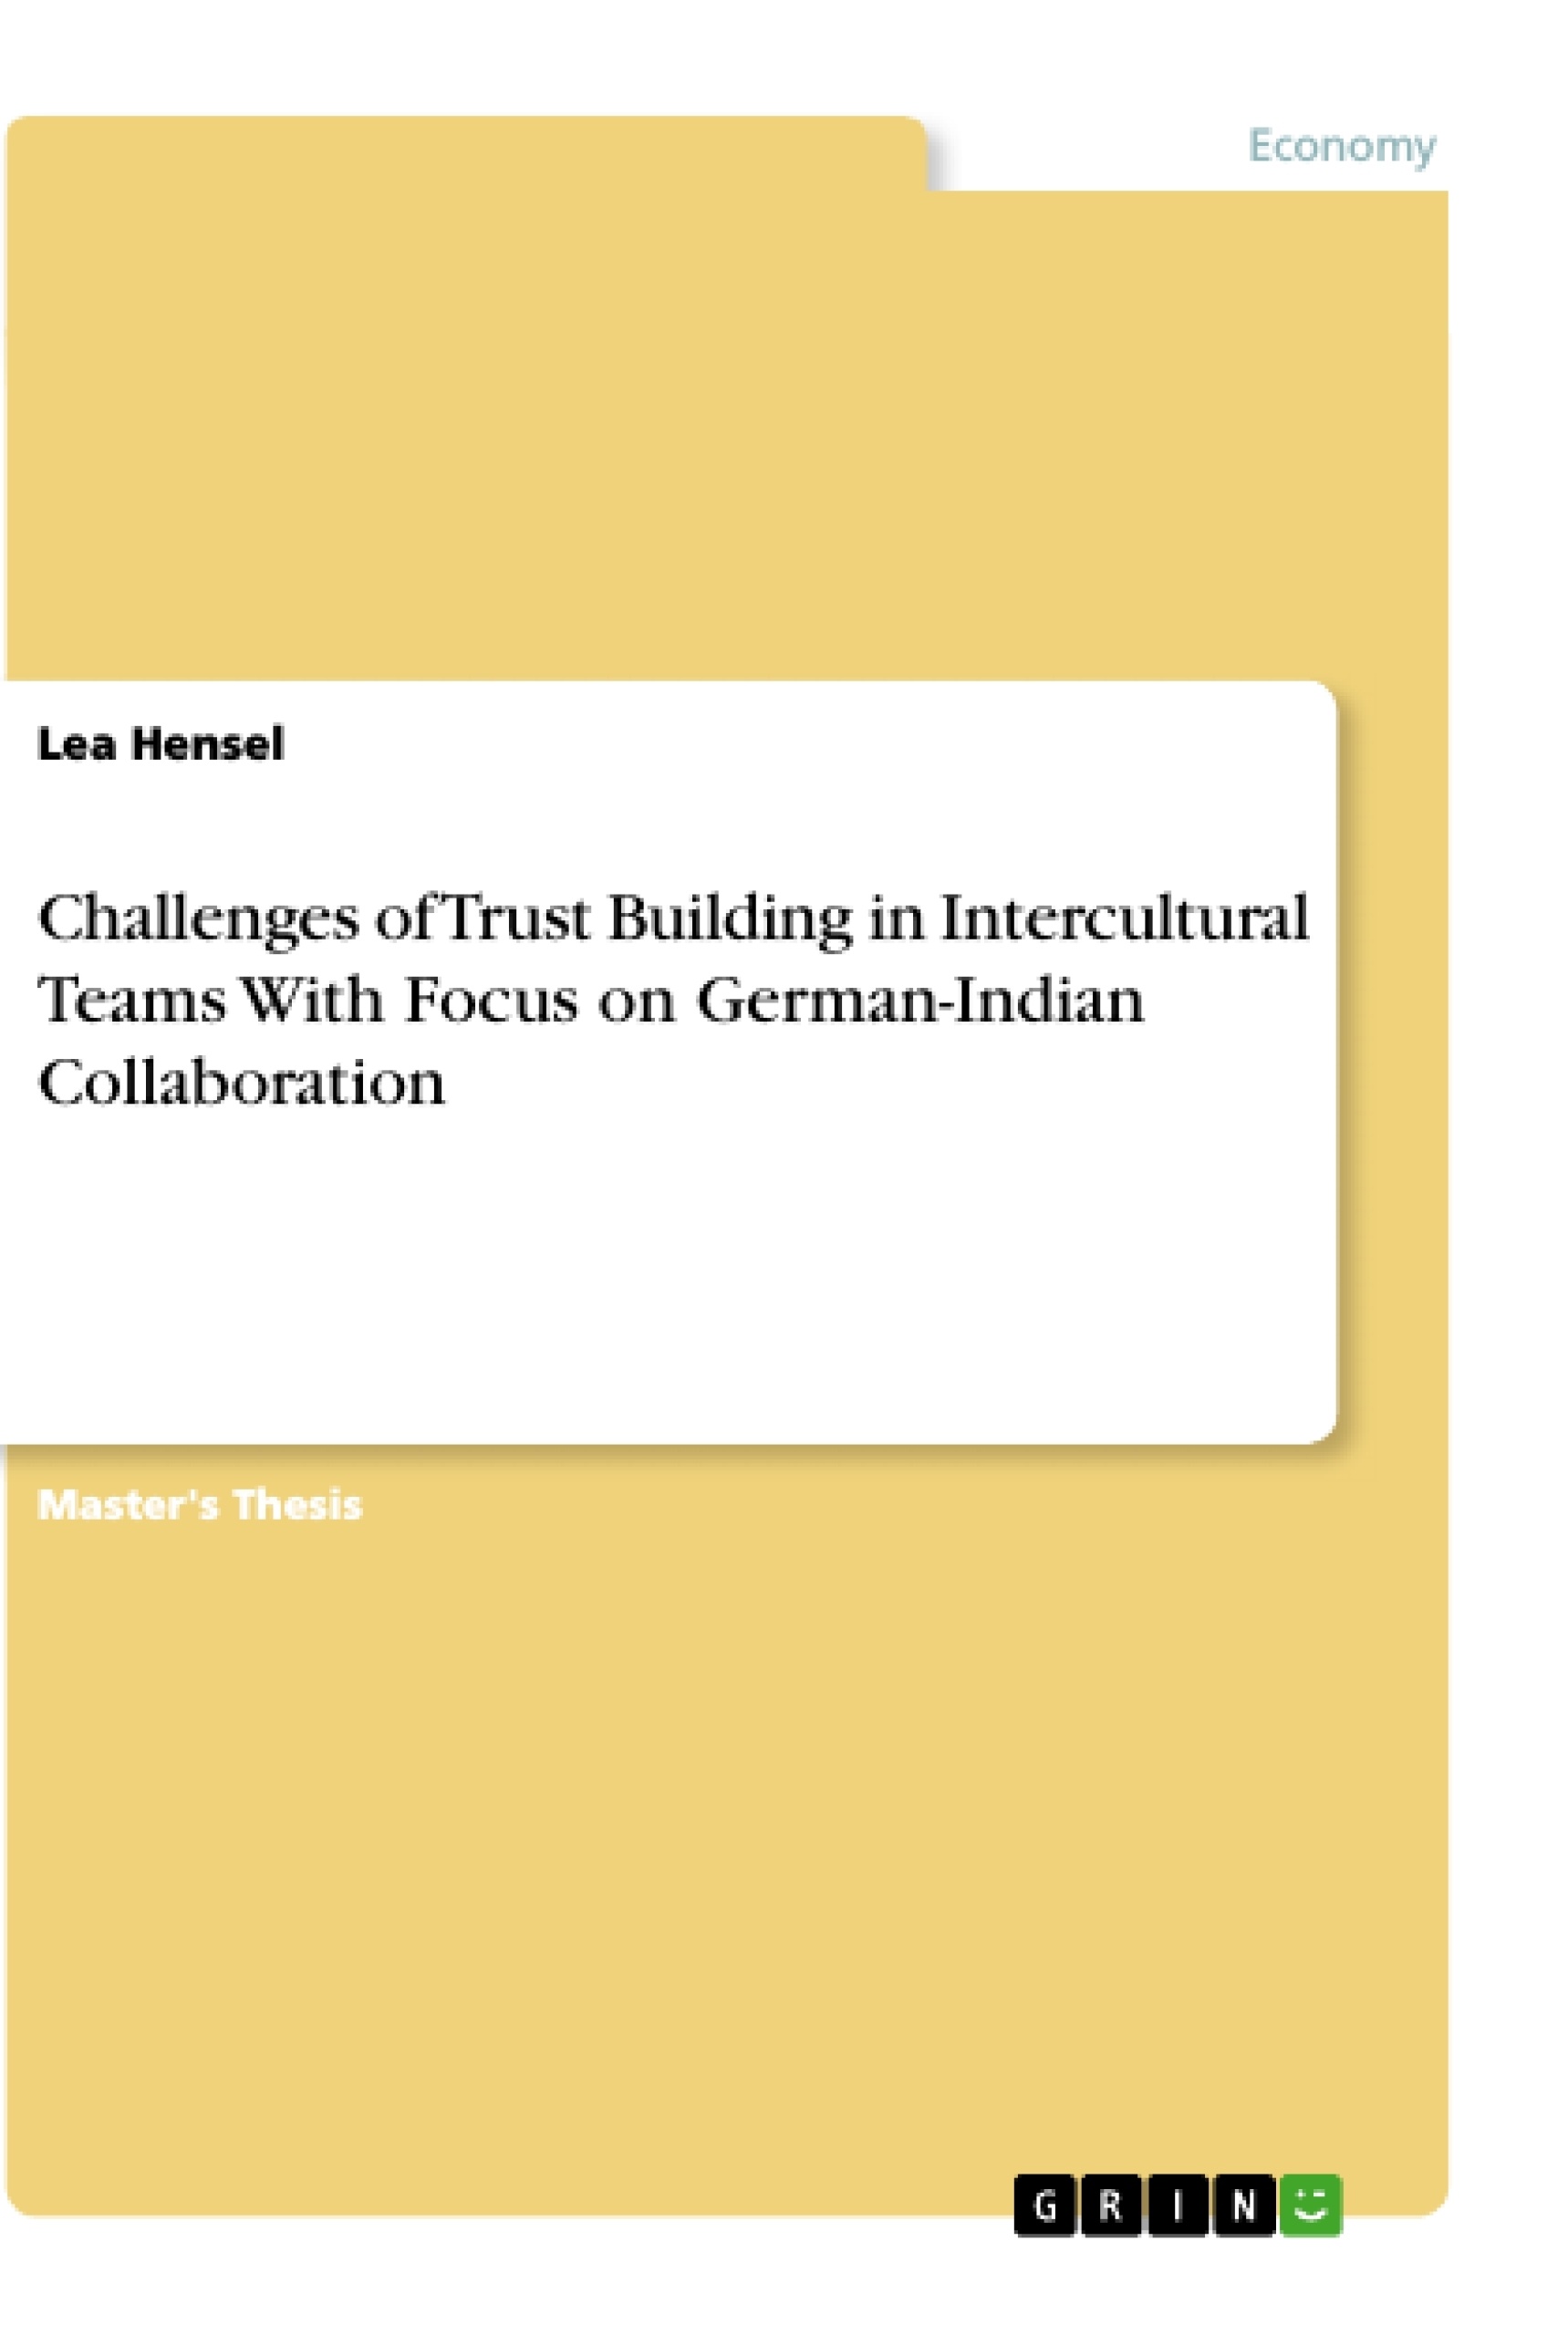 Titel: Challenges of Trust Building in Intercultural Teams With Focus on German-Indian Collaboration